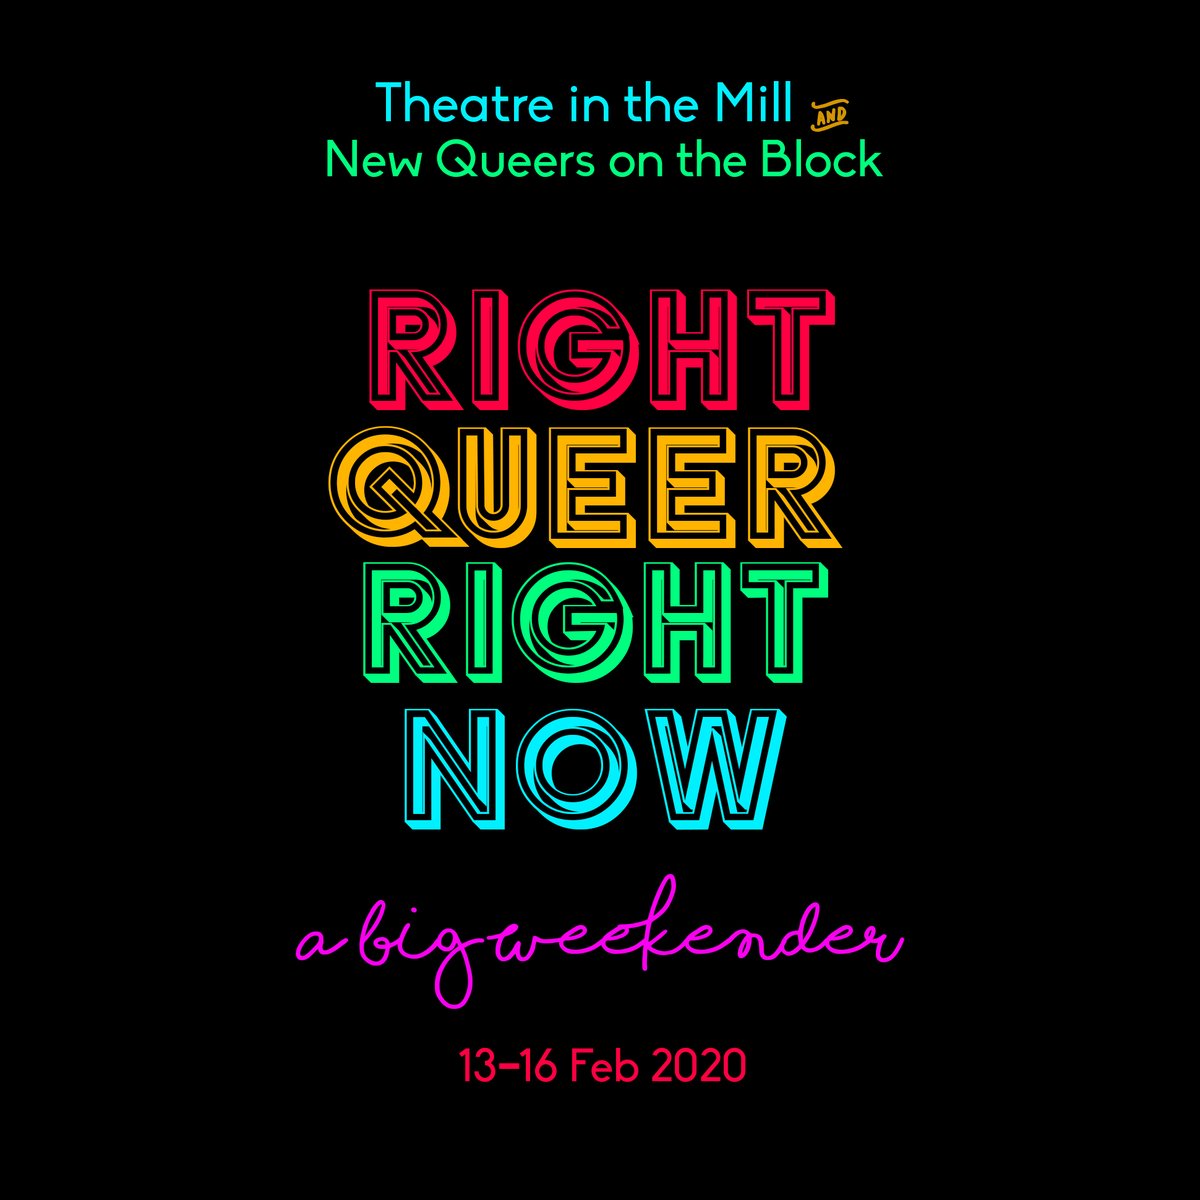 There's so much going on in Bradford for #LGBTHistoryMonth including theatre and performances from @TiM_Bfd as part of their #RightQueerRightNow Weekender, 13-16 February 🌈🏳️‍🌈

Find out more here theatreinthemill.com/rightqueerrigh…